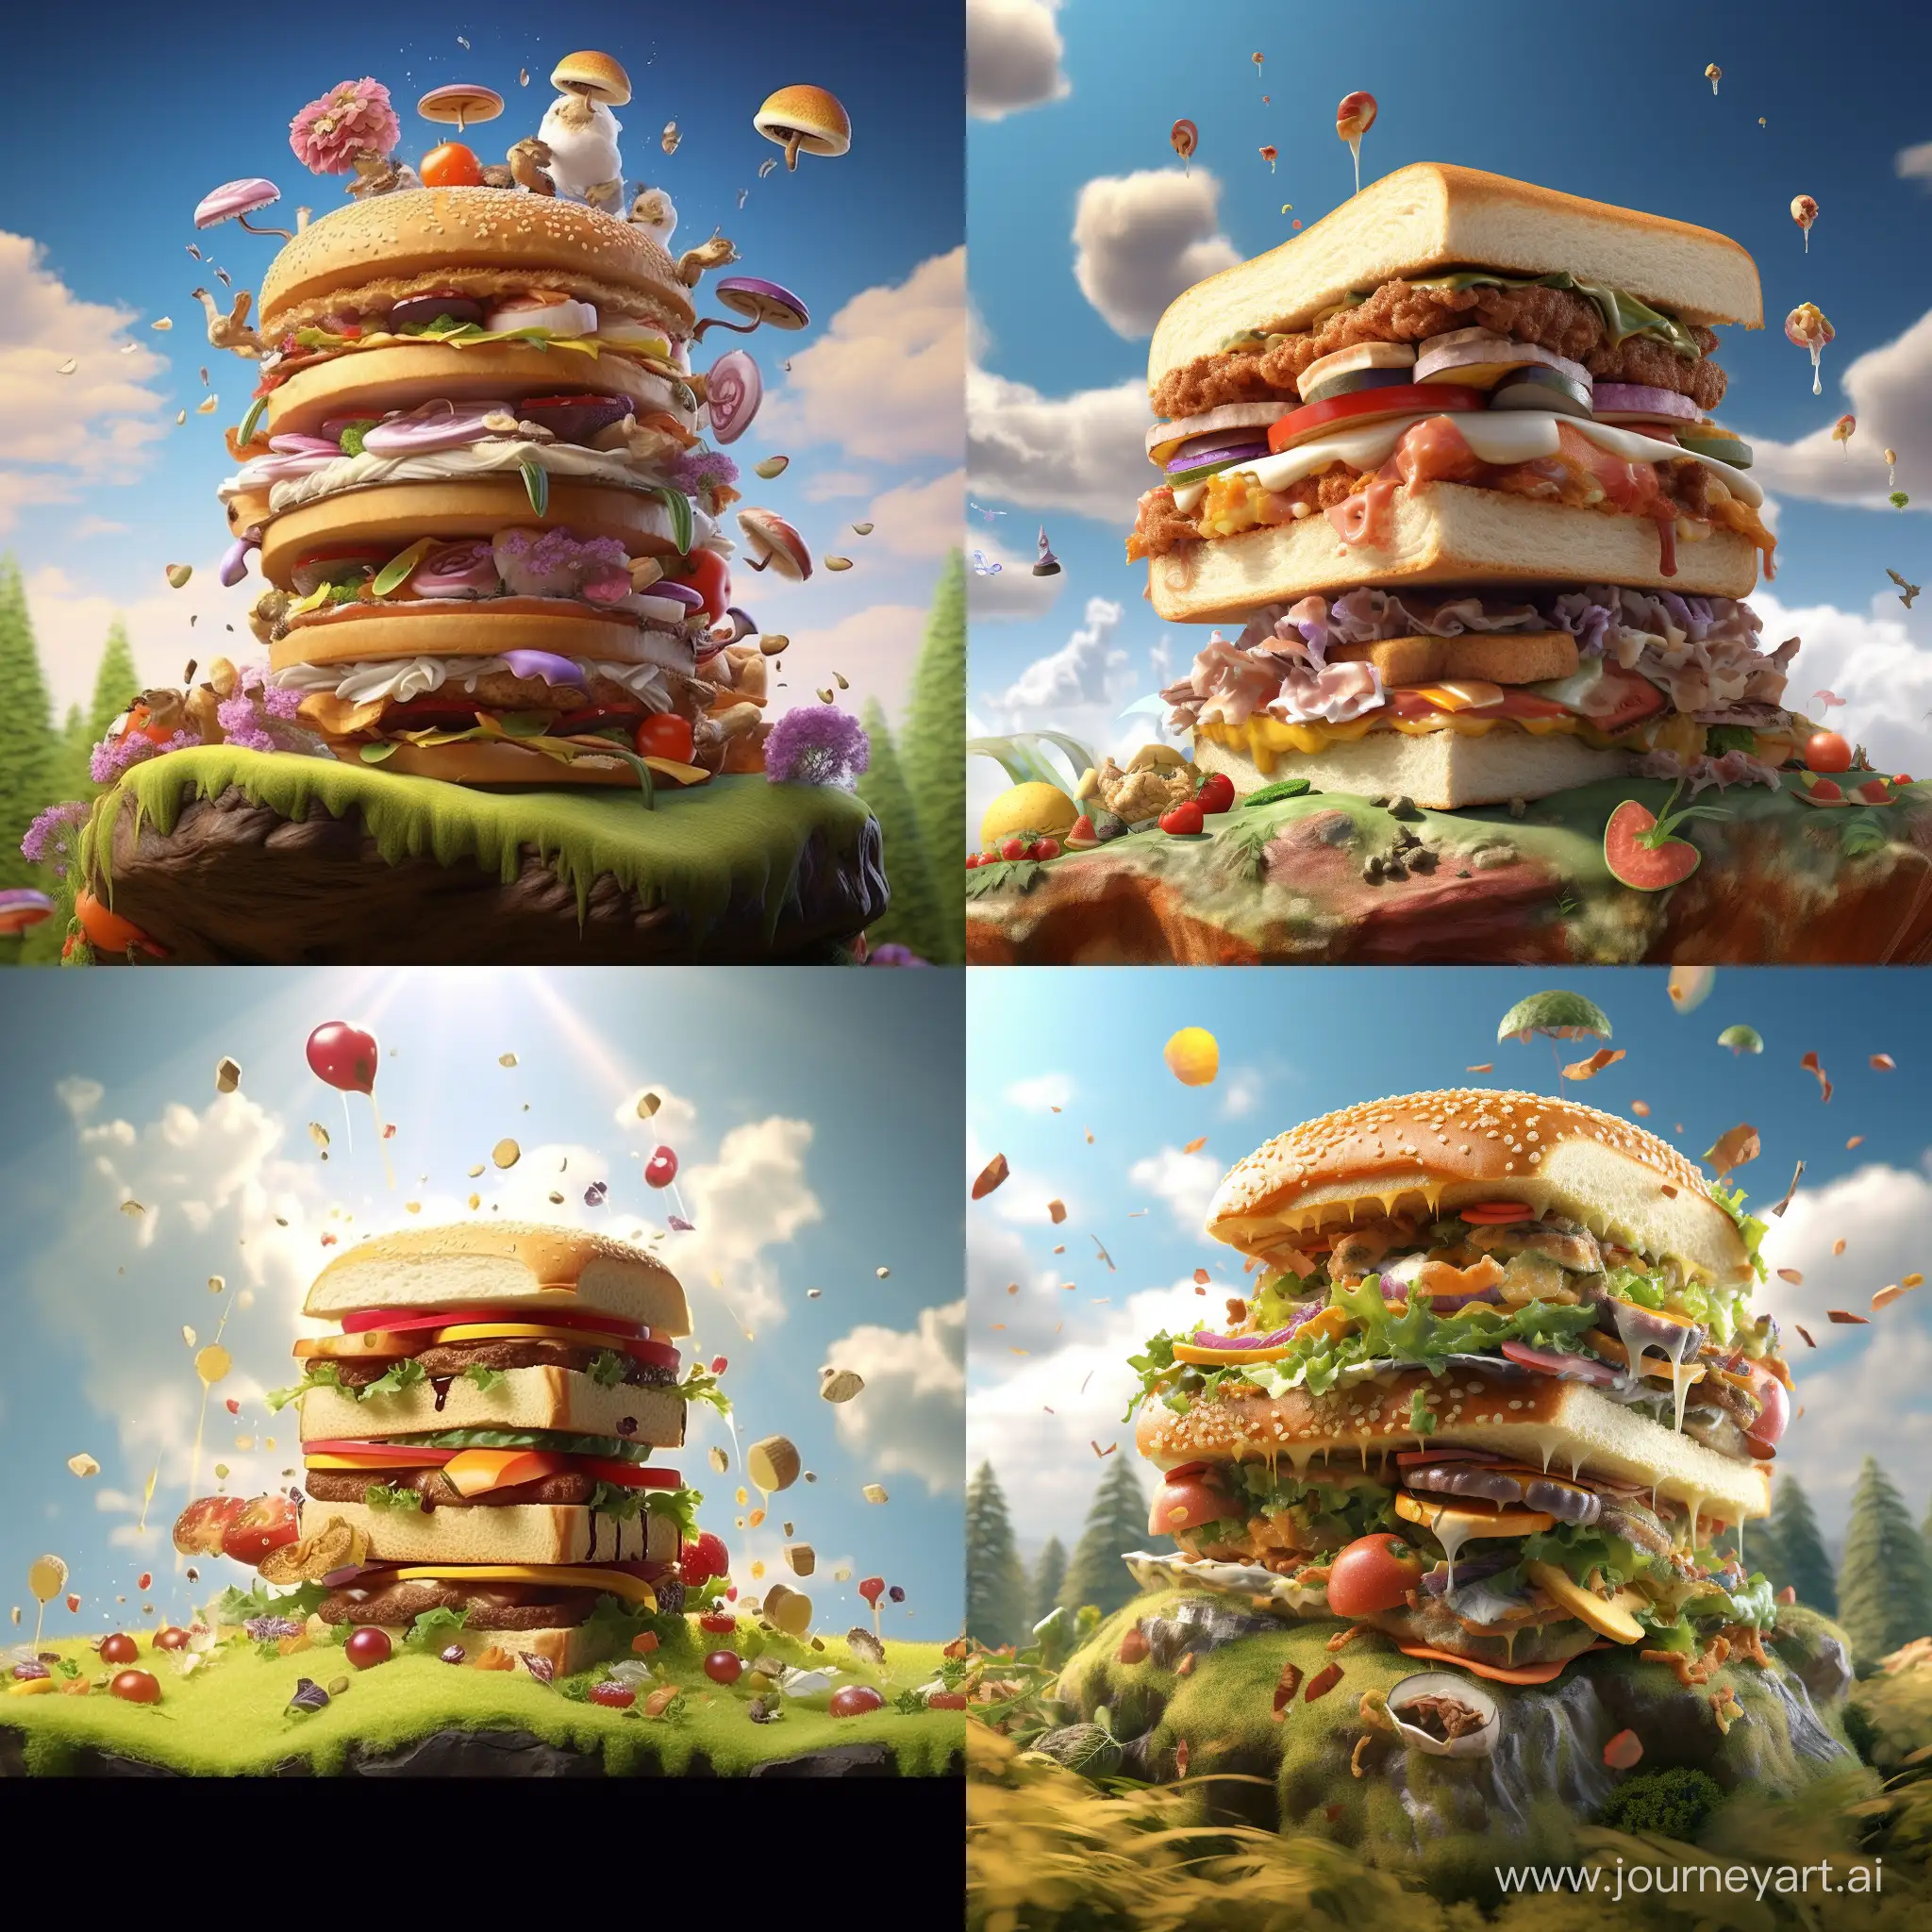 Delicious-Towering-3D-Animation-of-an-Extravagant-Sandwich